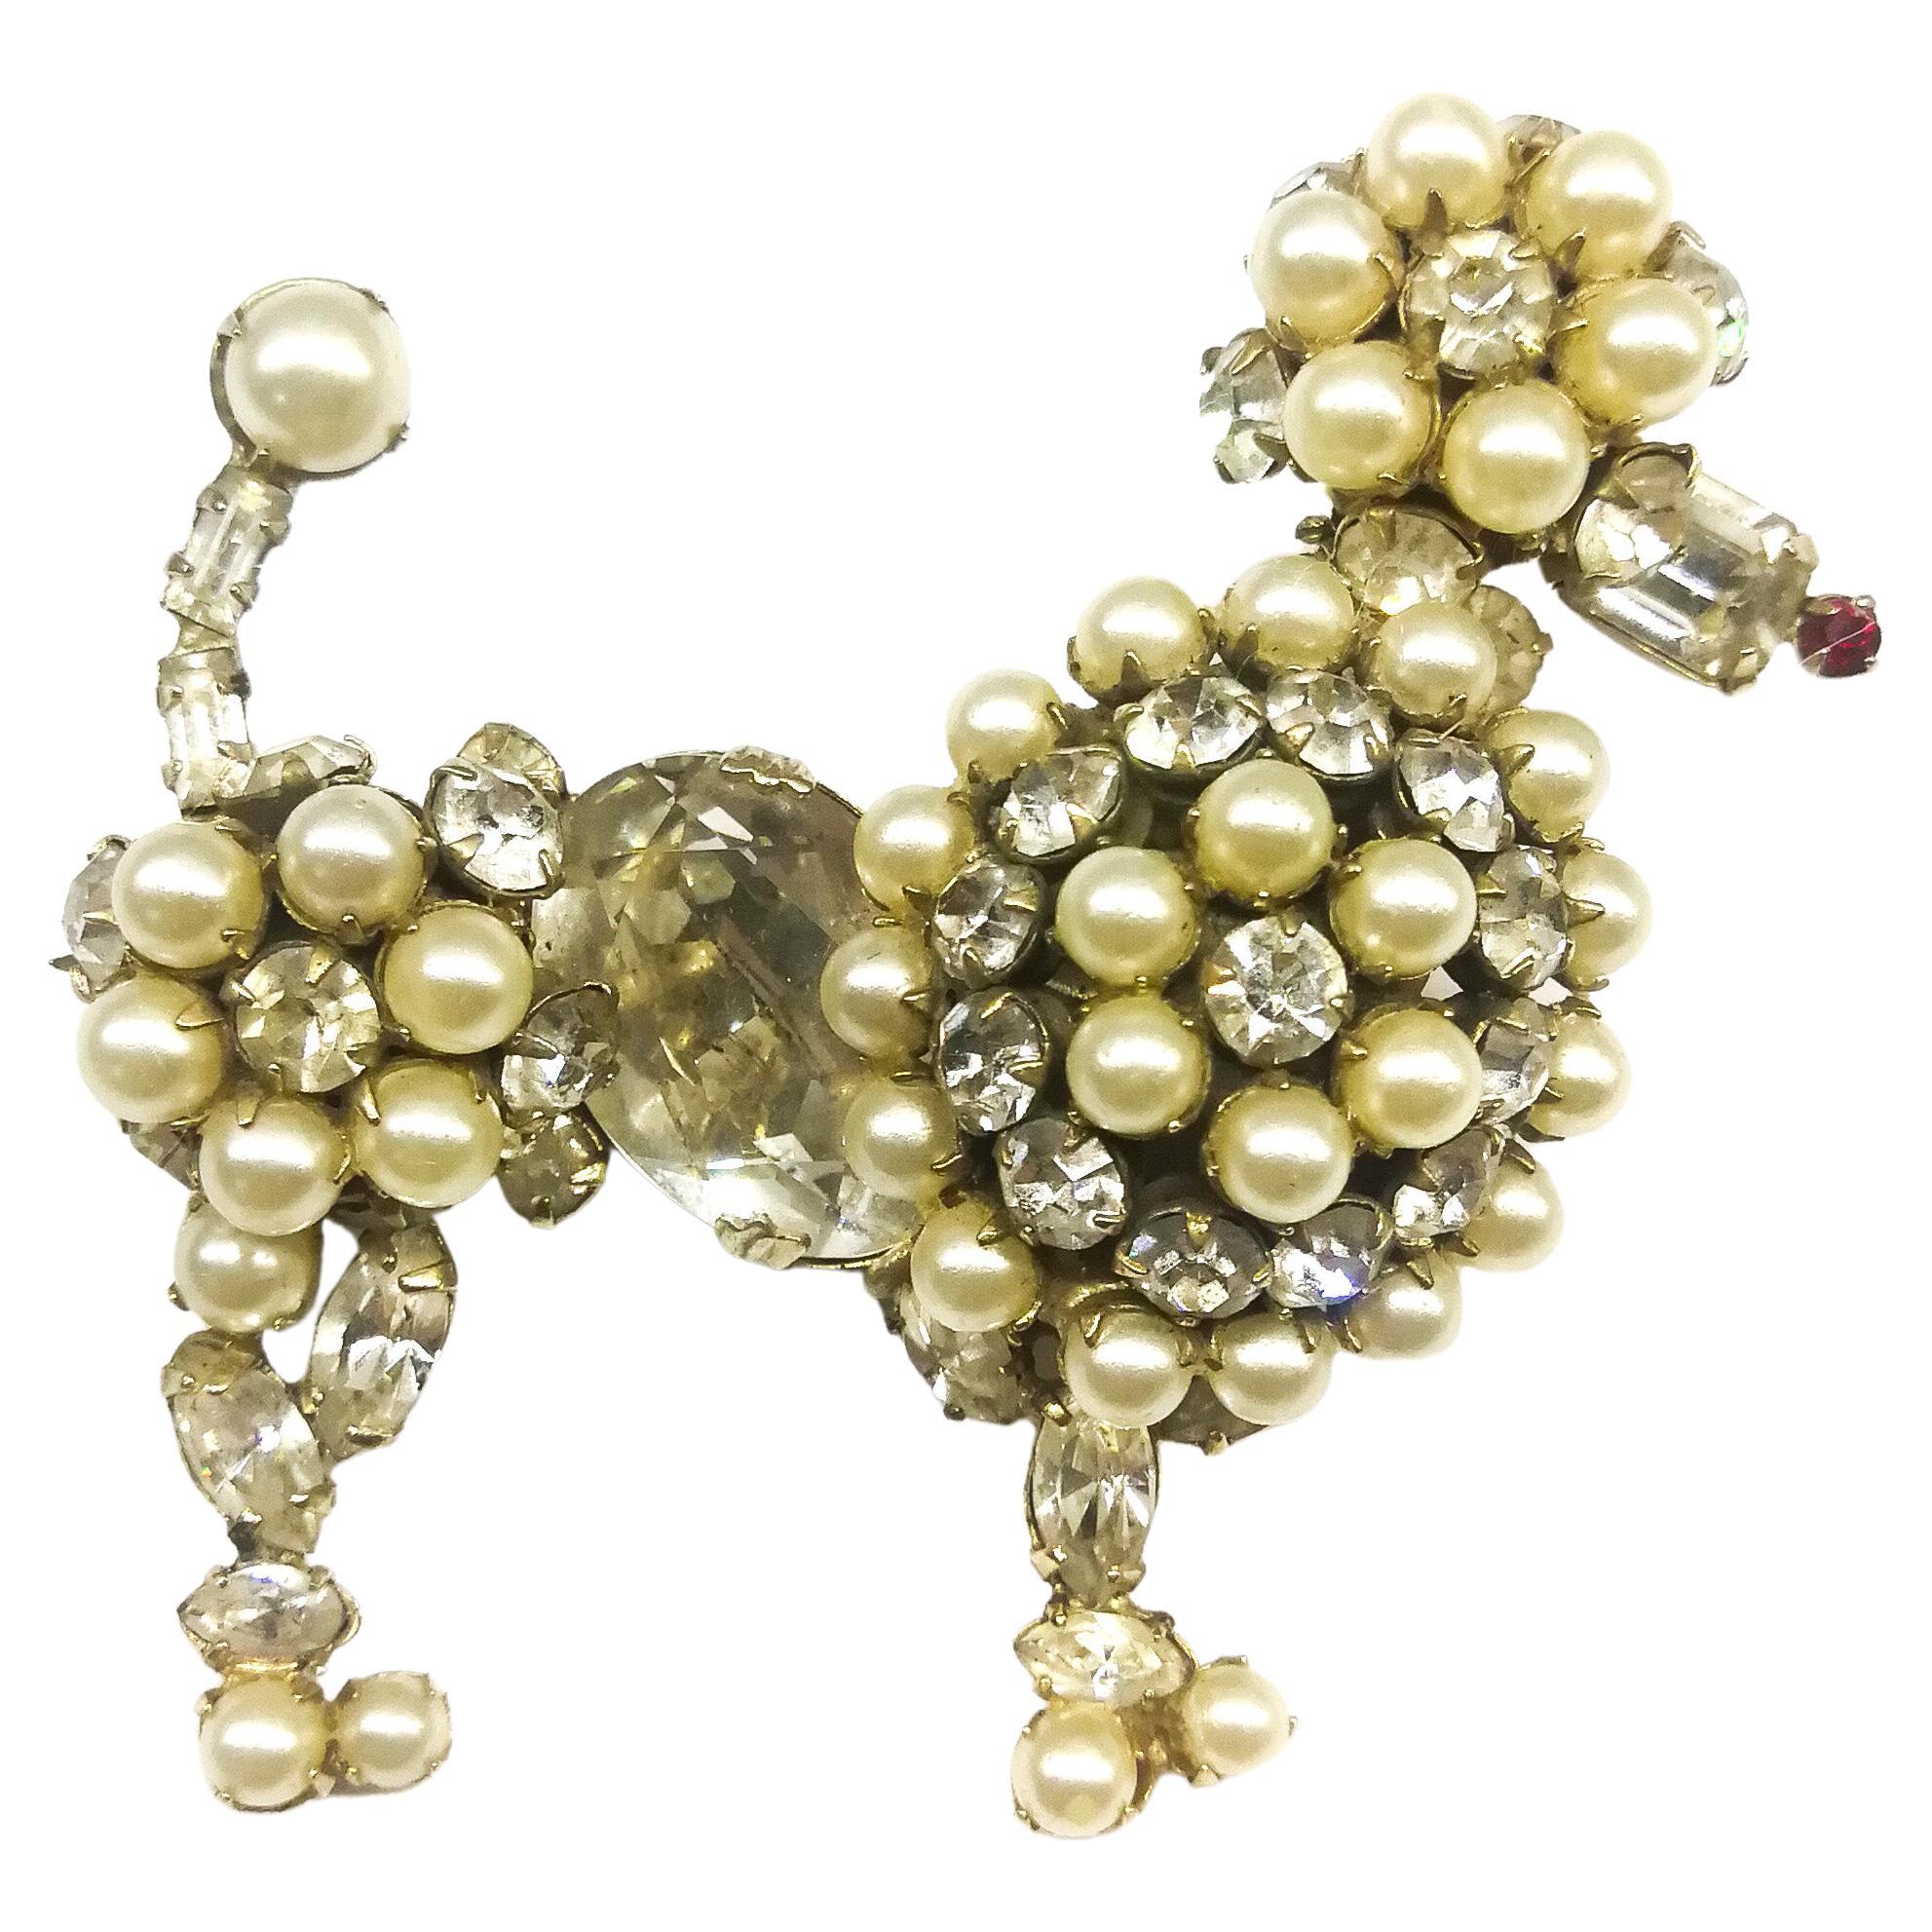 A paste pearl and clear paste 'poodle' brooch, Schreiner, USA, 1960s